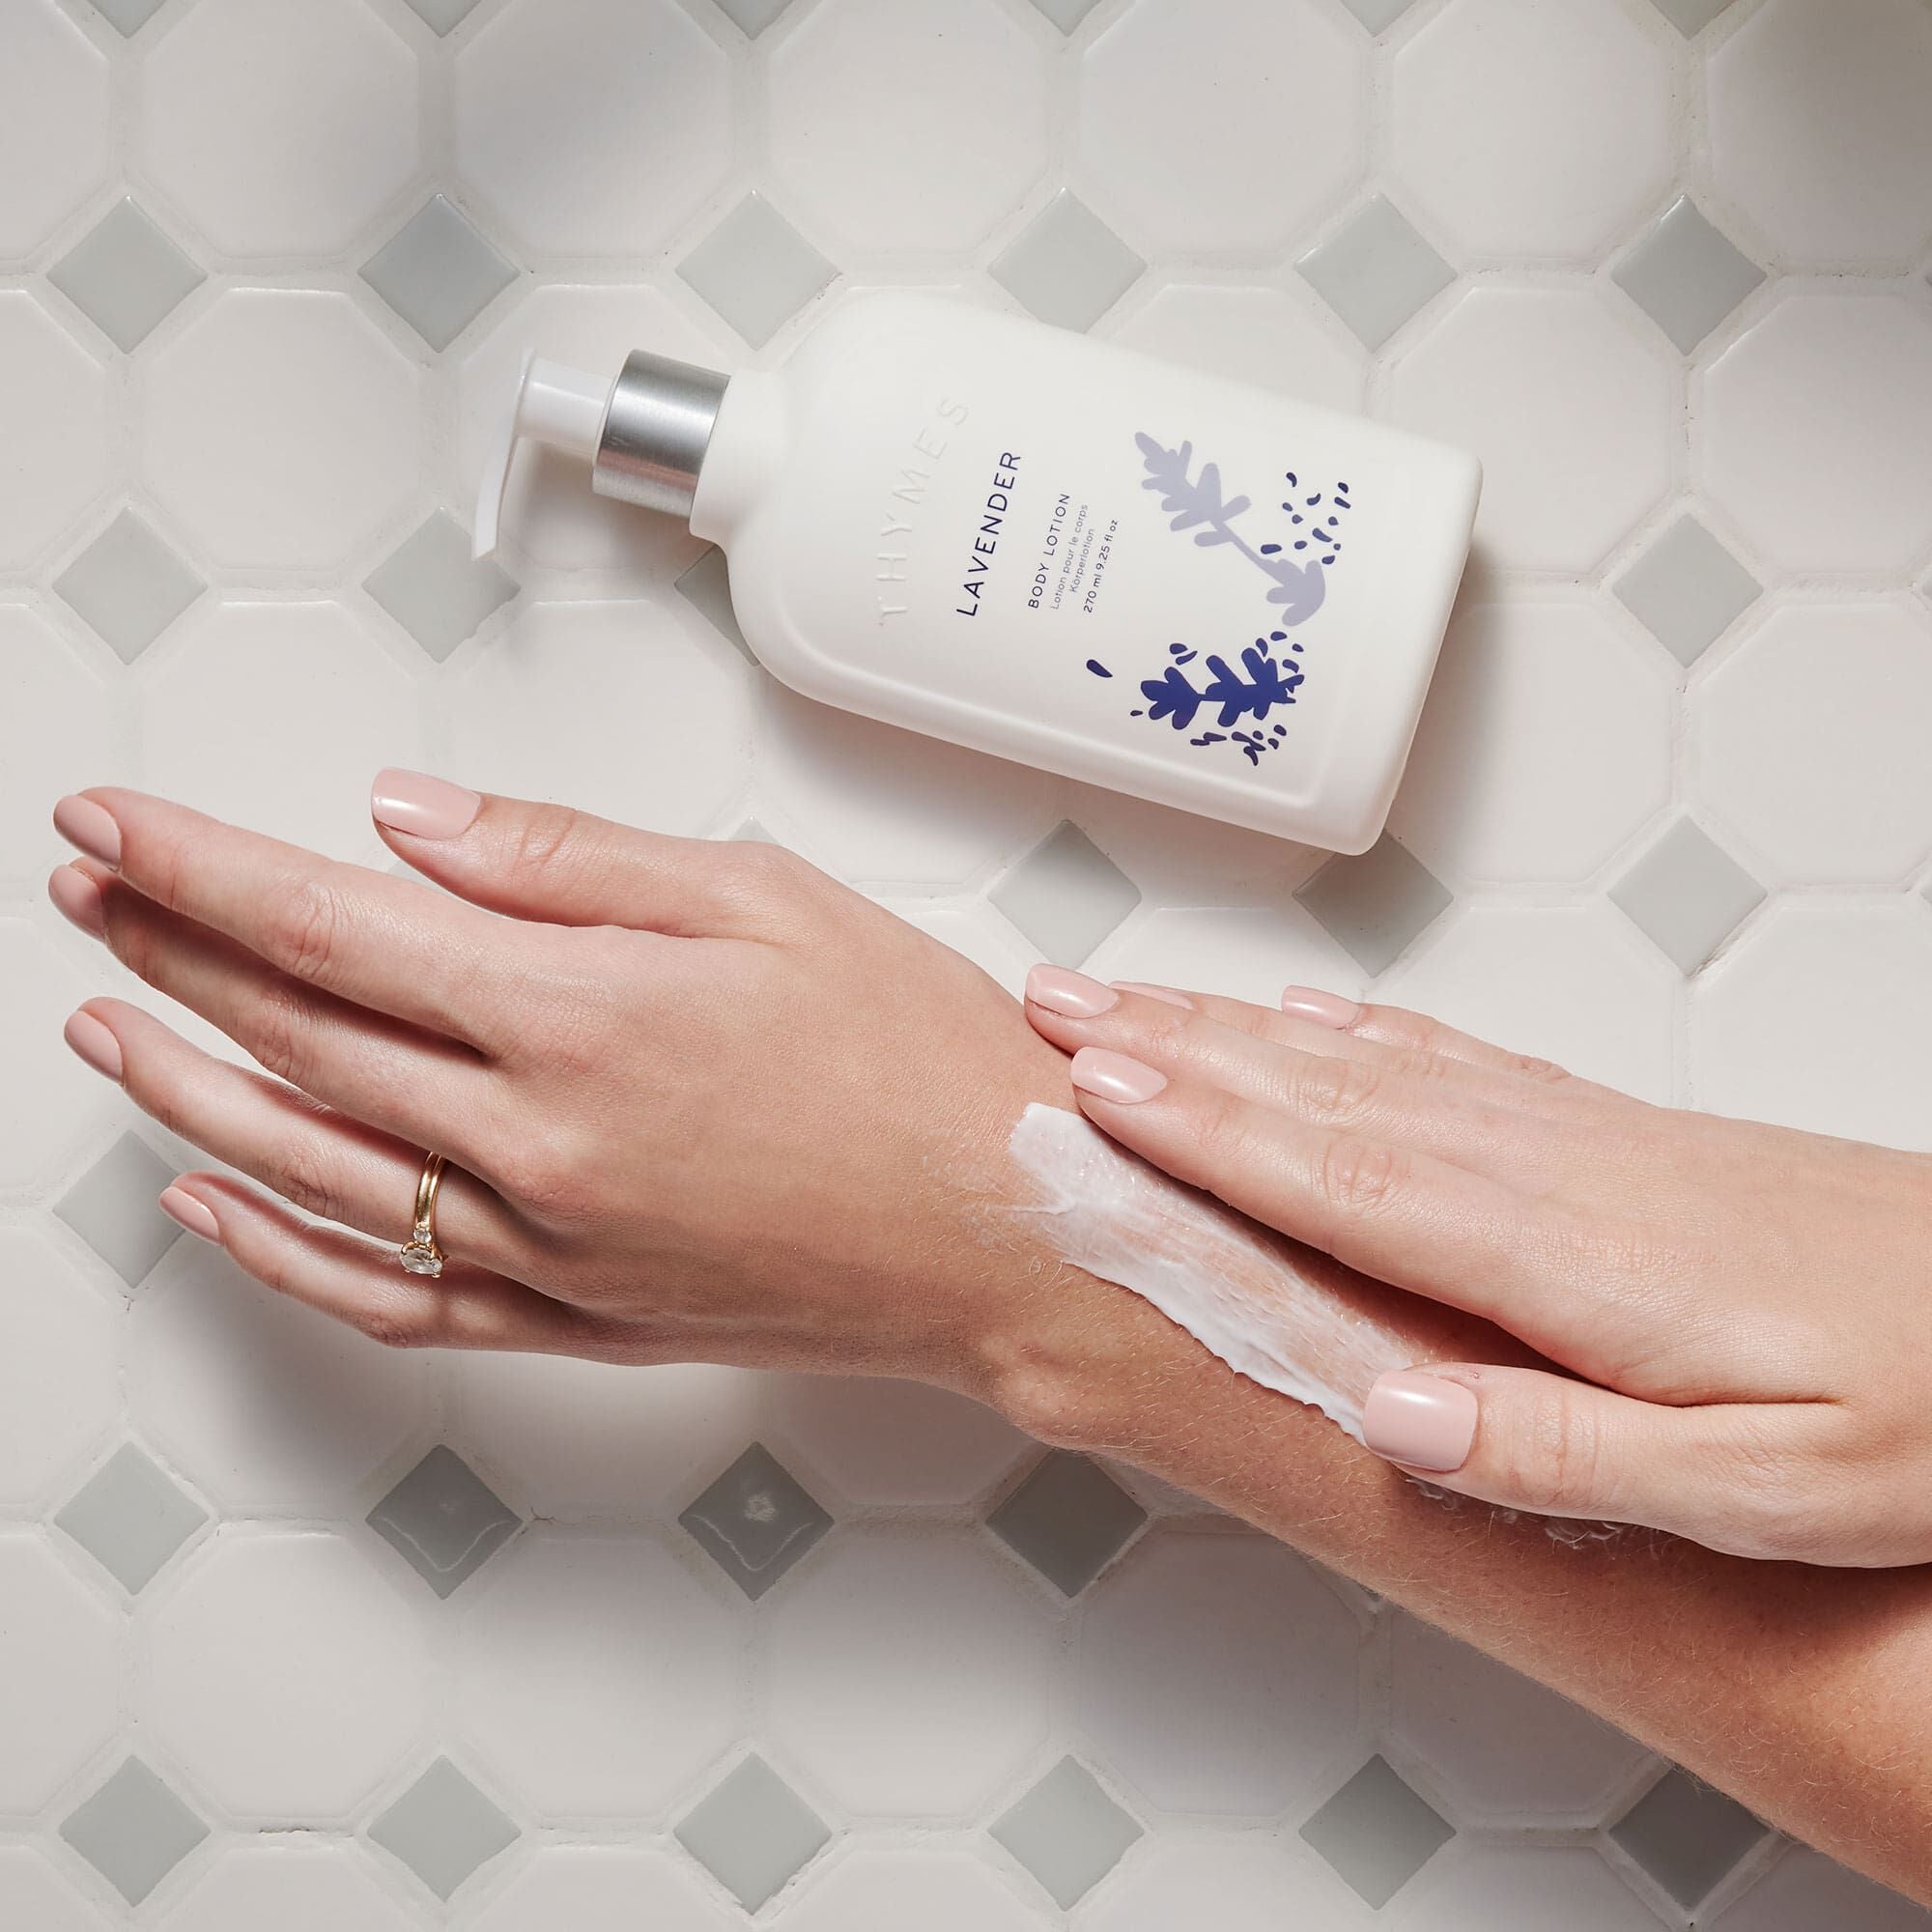 Thymes Lavender Body Lotion!!!